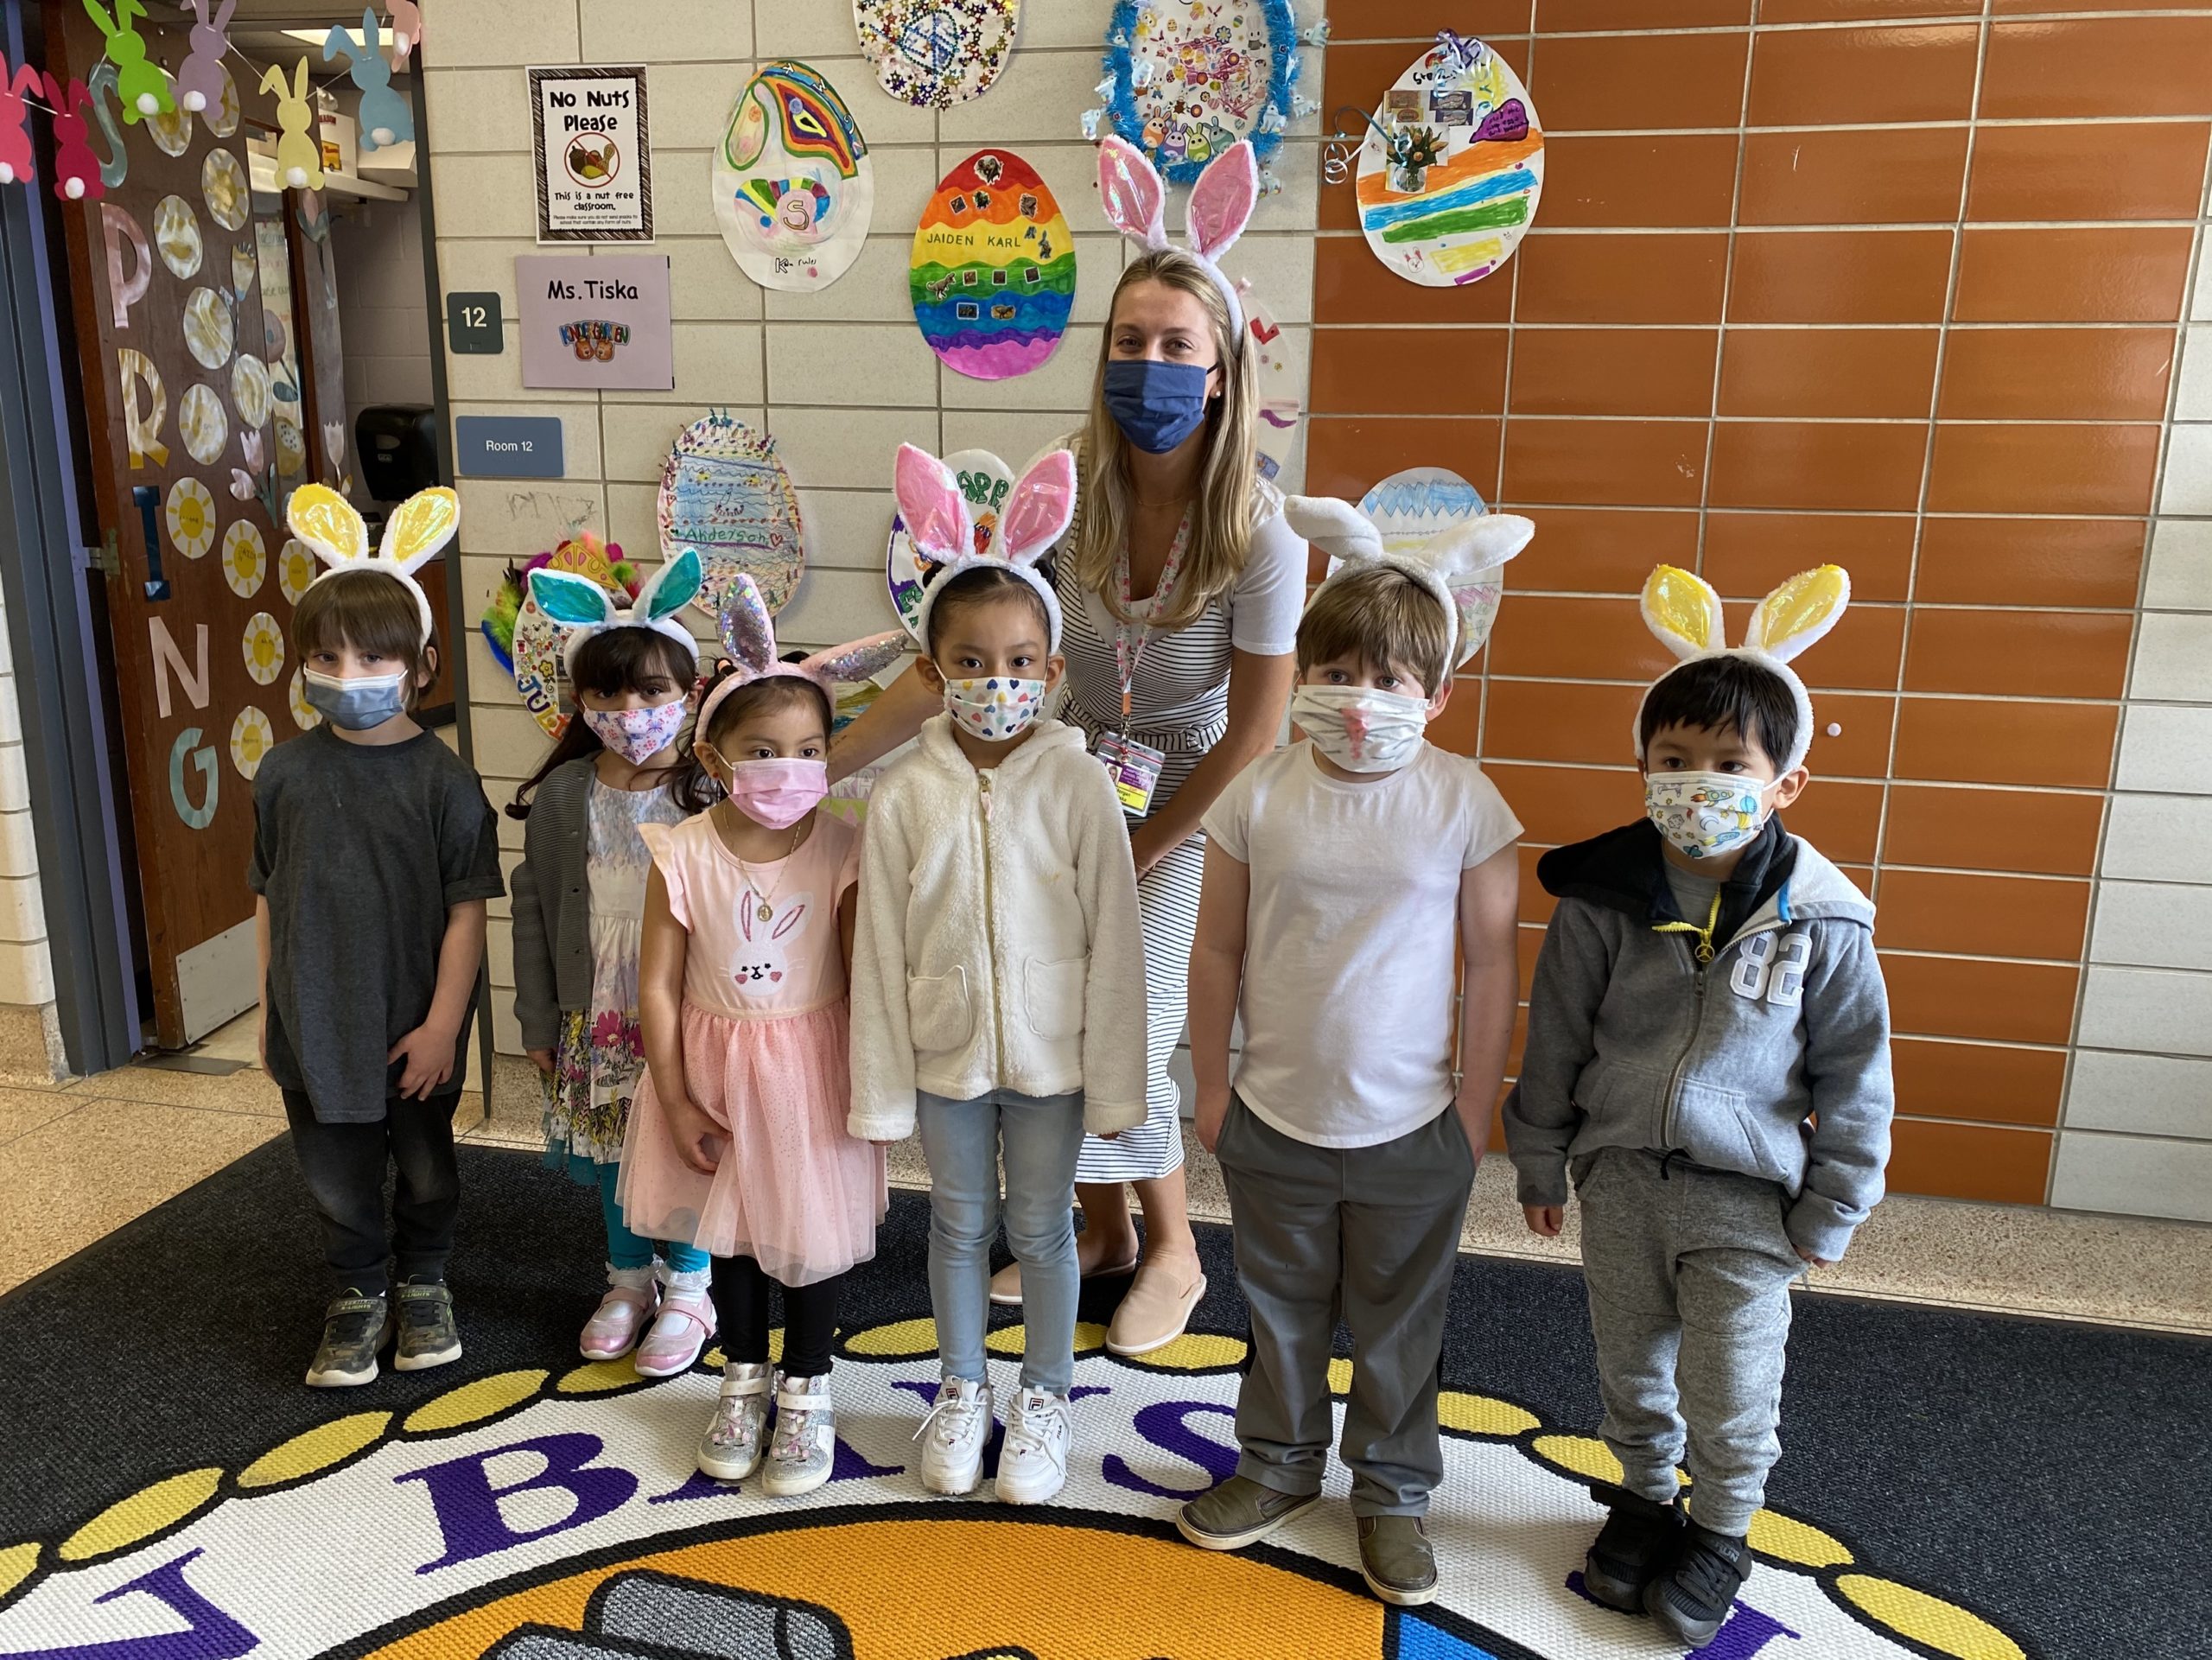 The little bunnies in Morgan Tiska’s kindergarten class at Hampton Bays Elementary School were treated to an egg hunt on March 25. Out in the warm sun, the kindergartners searched their school’s grounds for colorful eggs, which they placed in paper bags that they had decorated for the occasion.